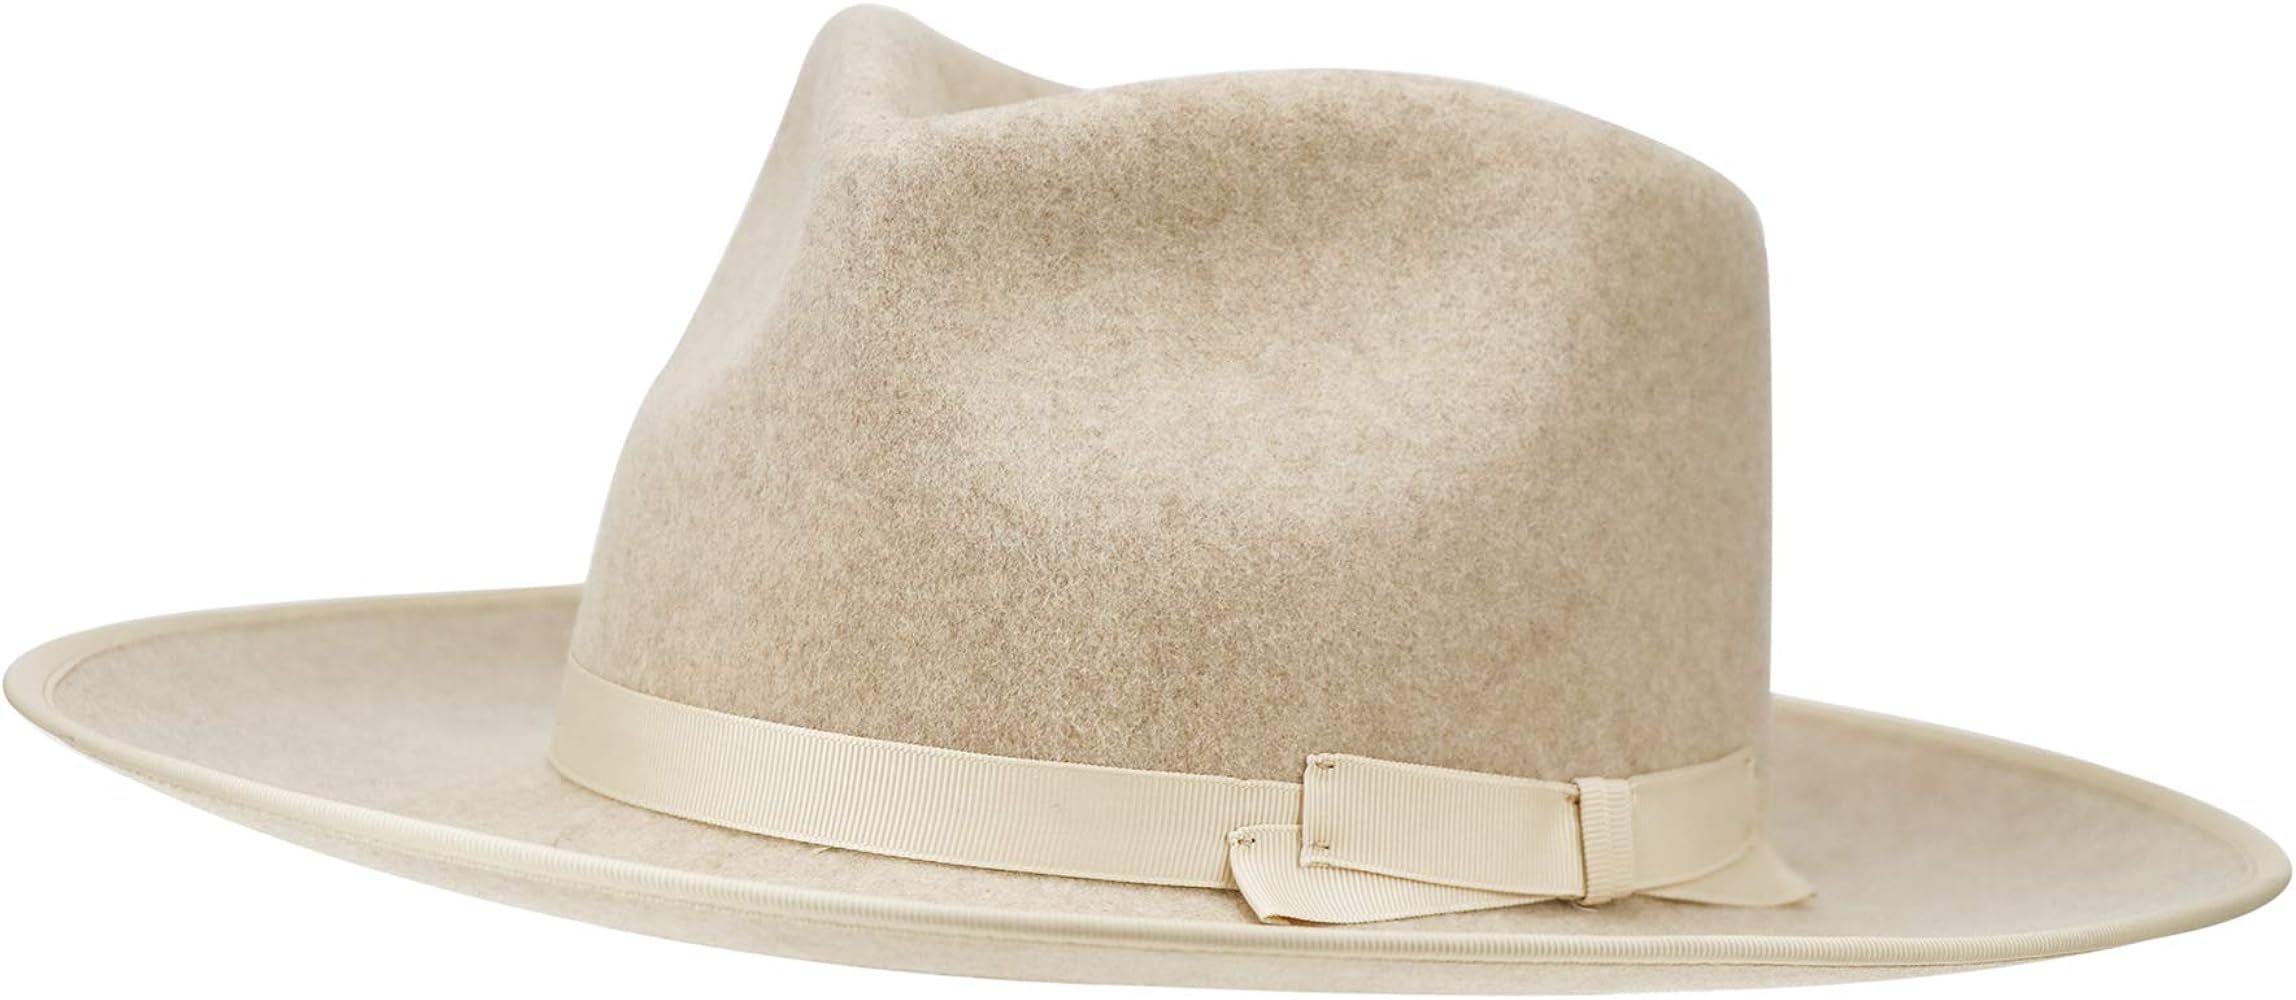 Fedora for Women 100% Wool Felt with Lining Outback Panama Derby Hats with Band Wide Brim Adjusta... | Amazon (US)